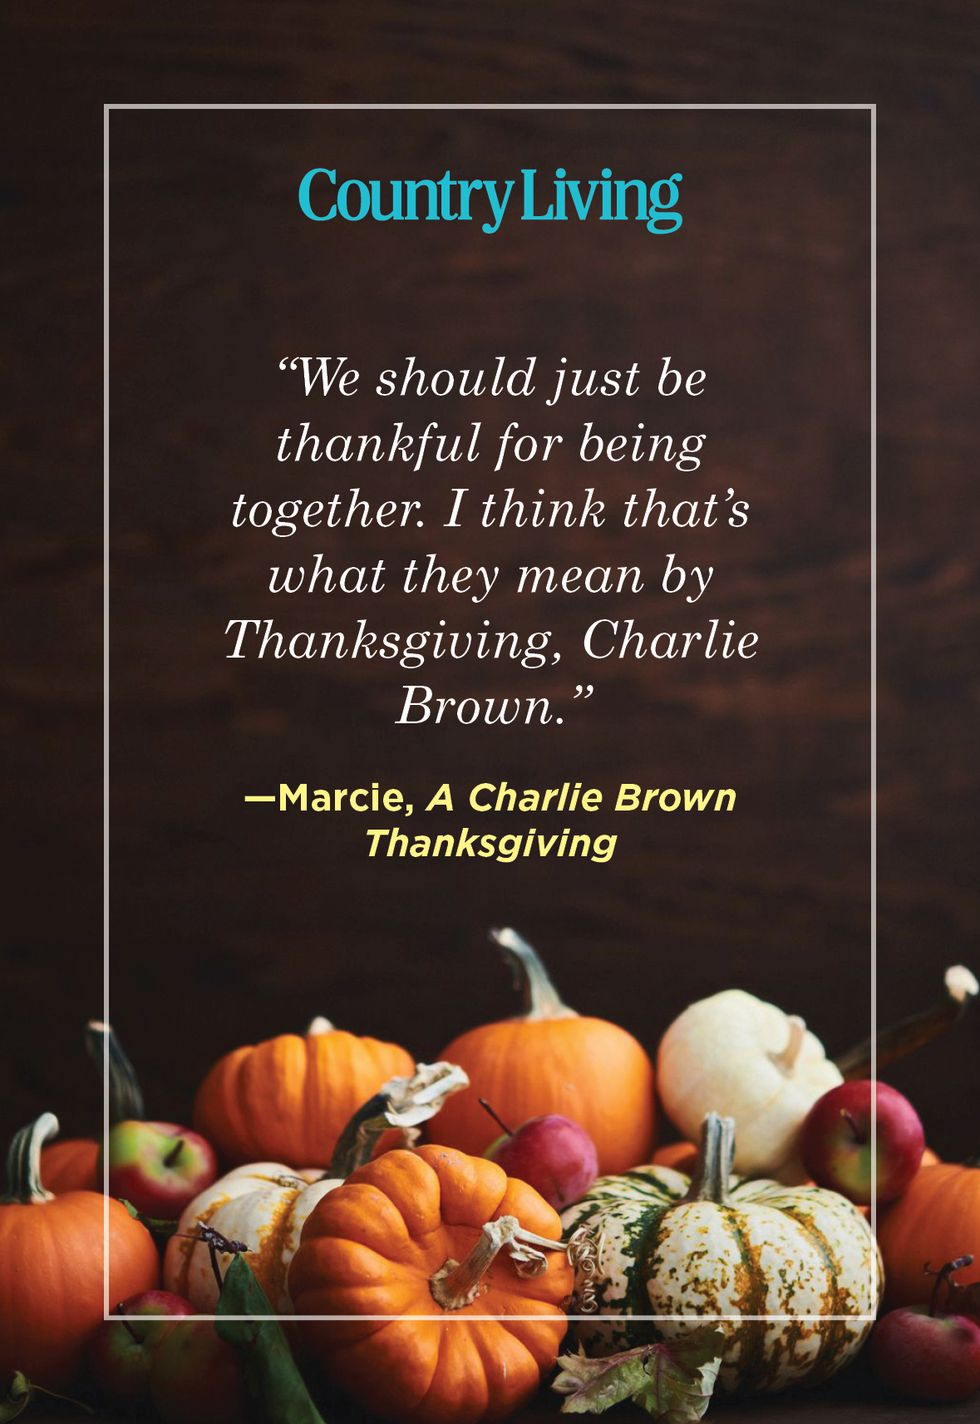 charlie brown thanksgiving quote on dark backgroud pictured with large collection of different pumpkin varieties